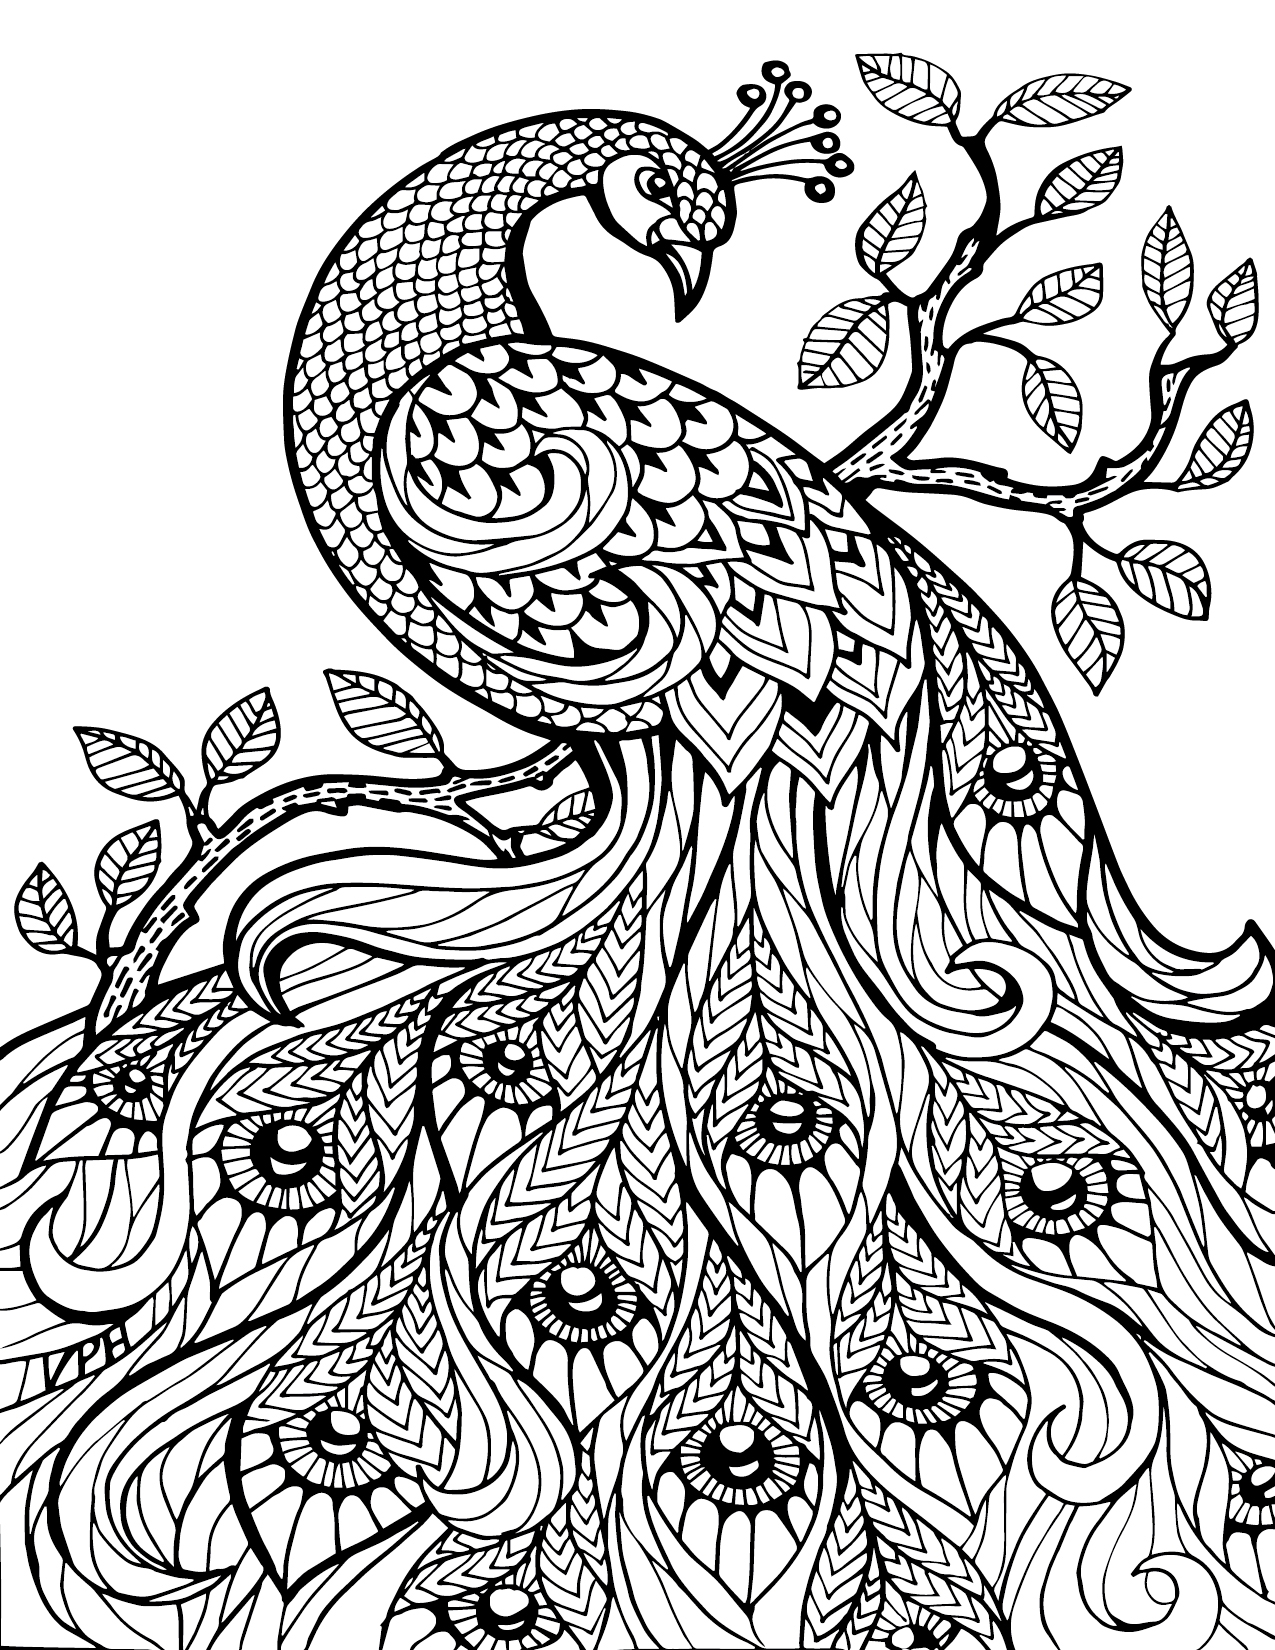 Intricate Coloring Pages For Kids at GetColorings.com | Free printable